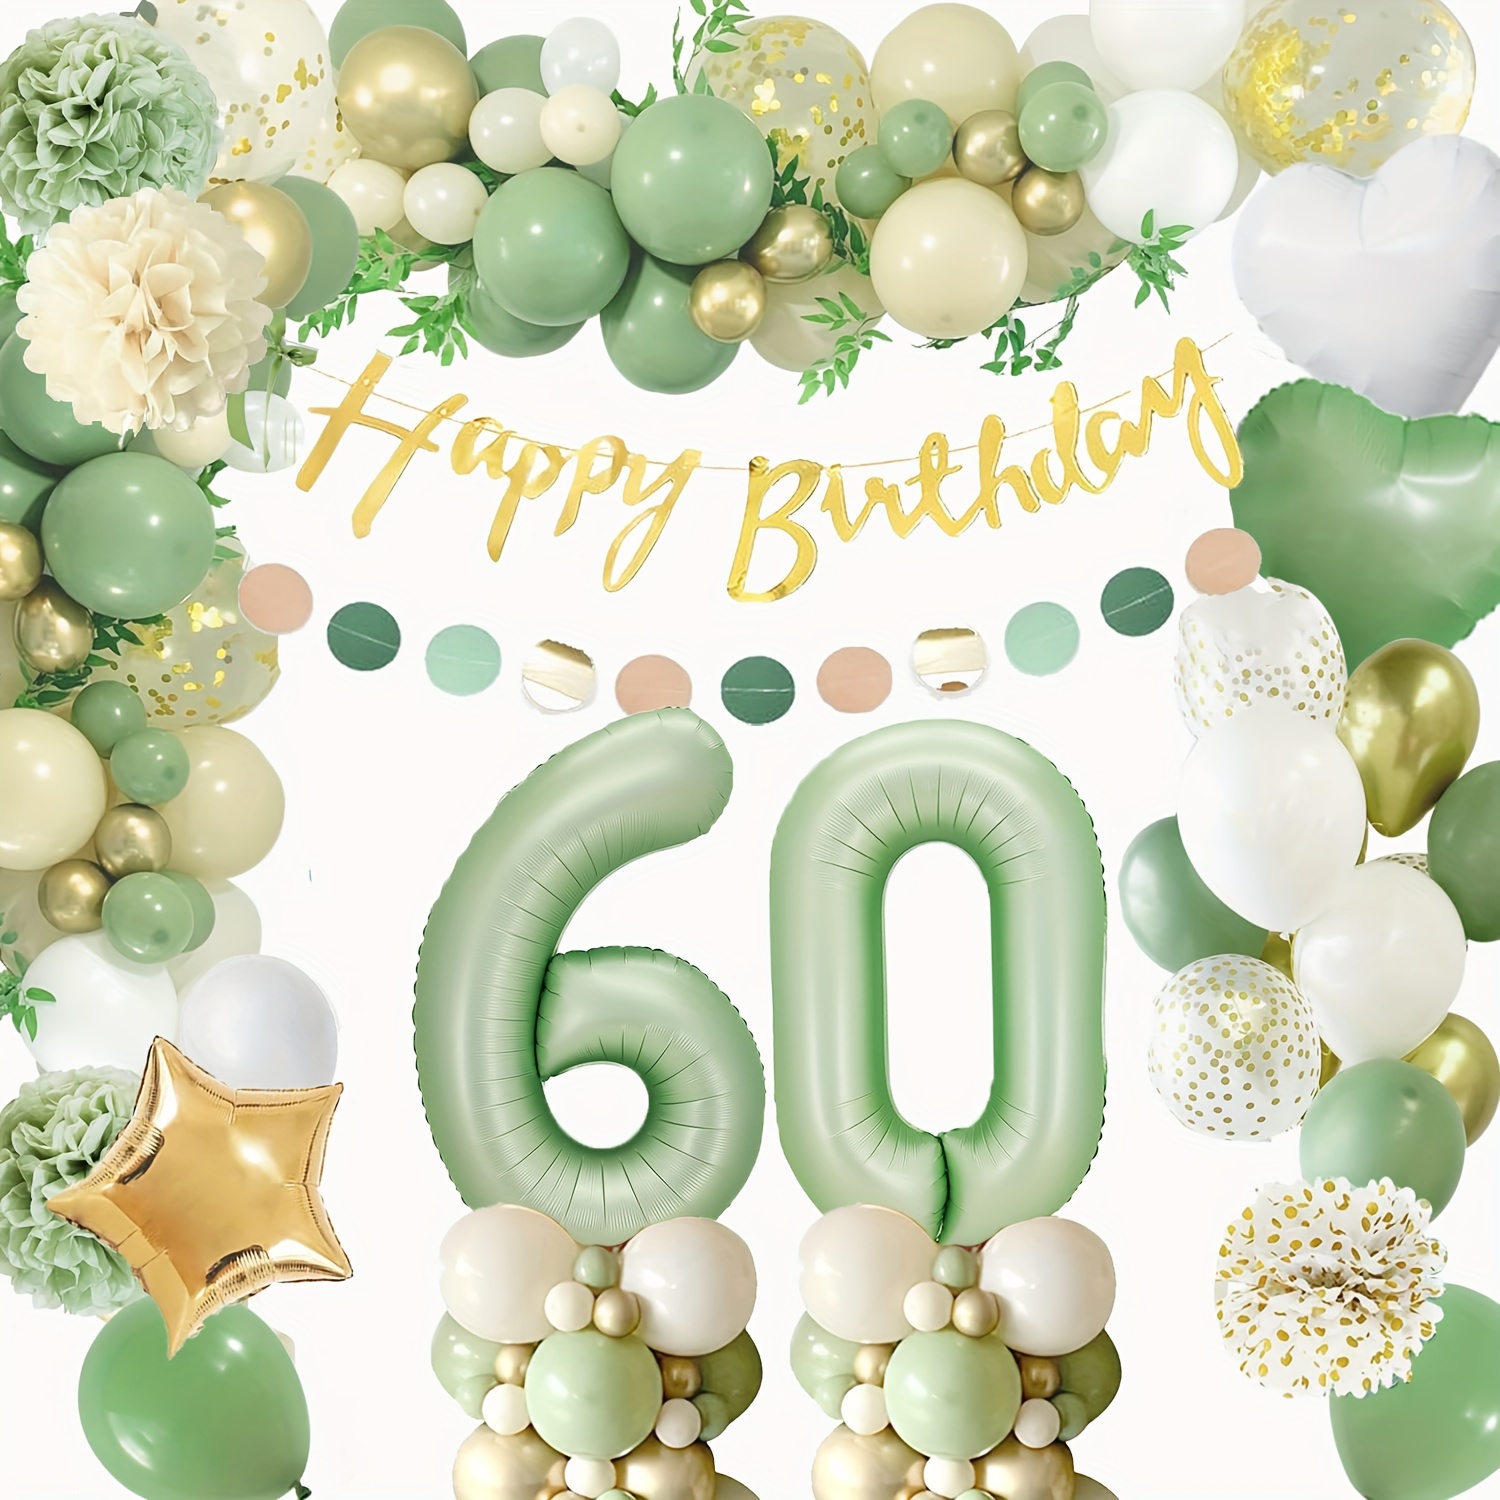 

70pcs, 60th Birthday Party Decorations For Women Men, Green Golden White And Number 60 Balloons, Happy Birthday Banner, Cake Topper, Paper Poms For 60 Birthday Party Decoration, Home Decor